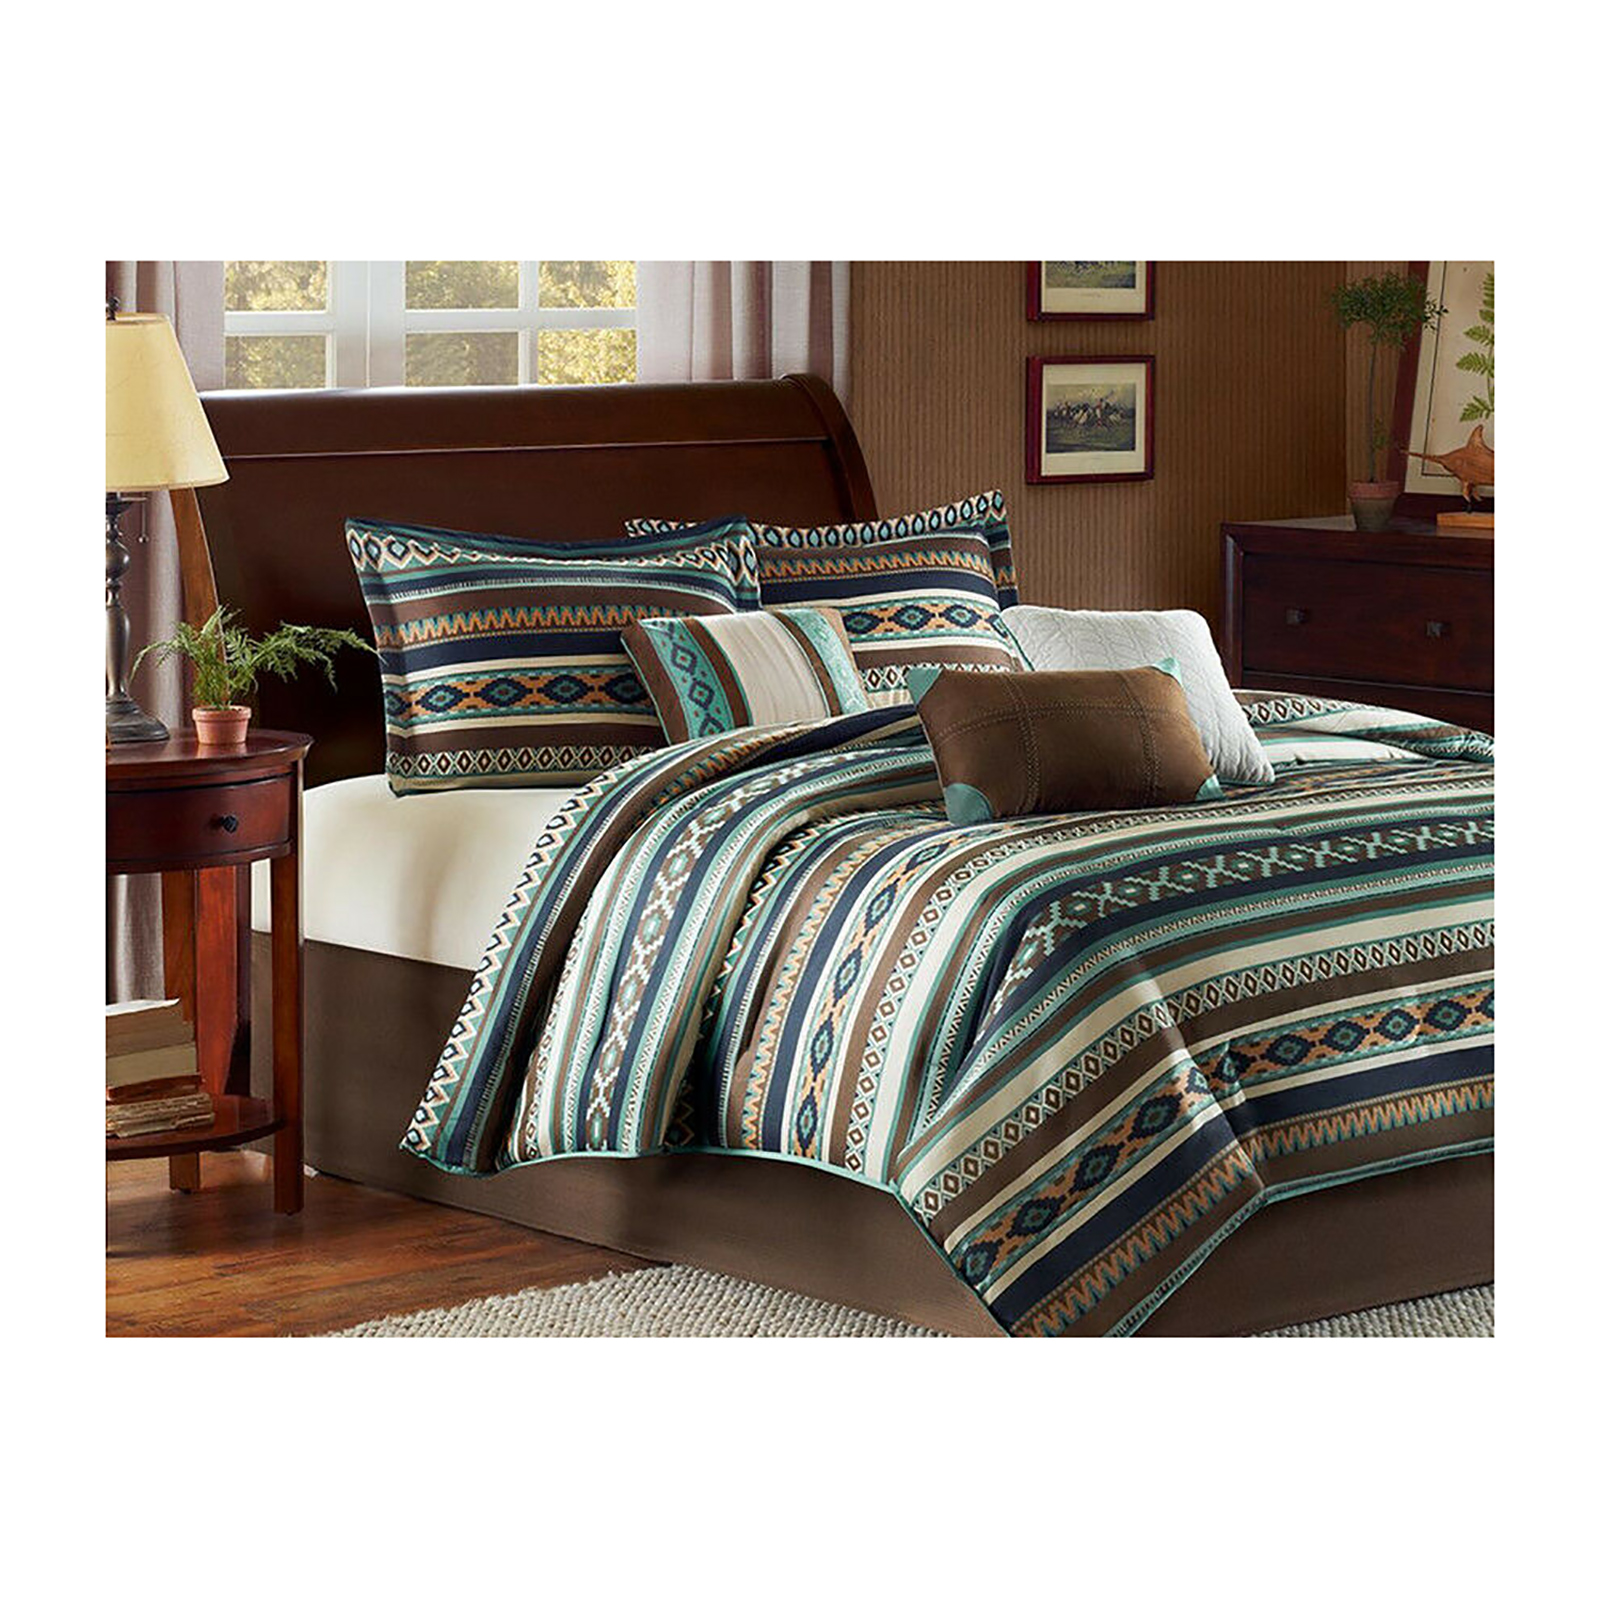 Aztec Southwest Native American Queen, Sears Bedding King Size